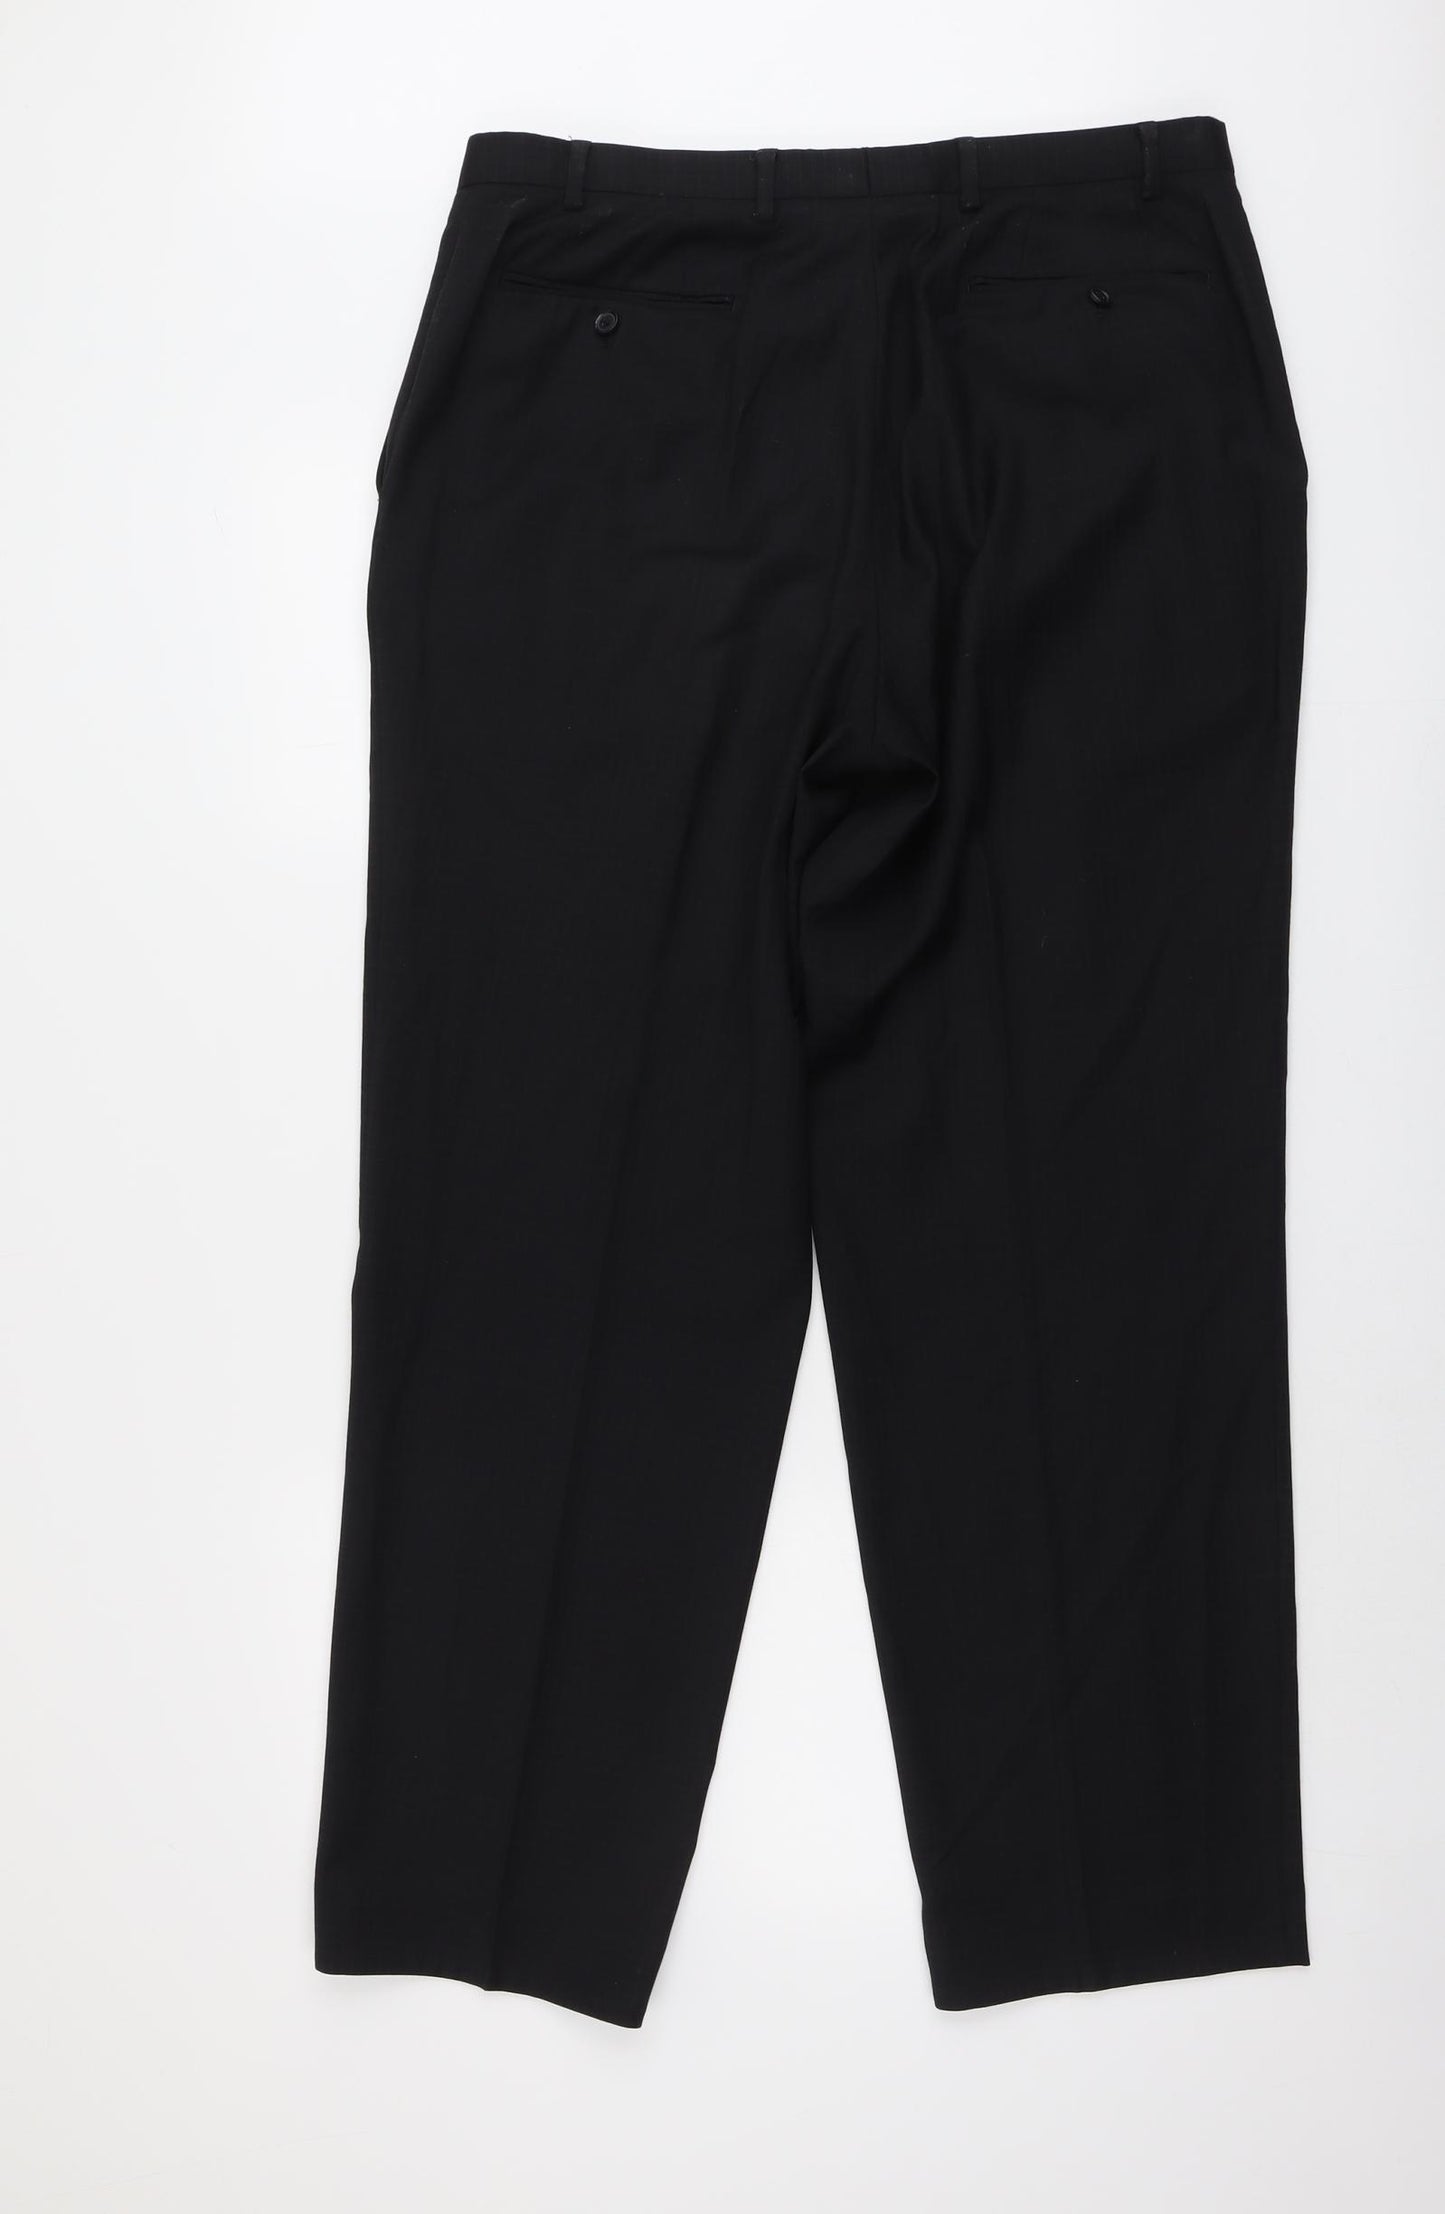 NEXT Mens Black Wool Trousers Size 36 in L31 in Regular Button